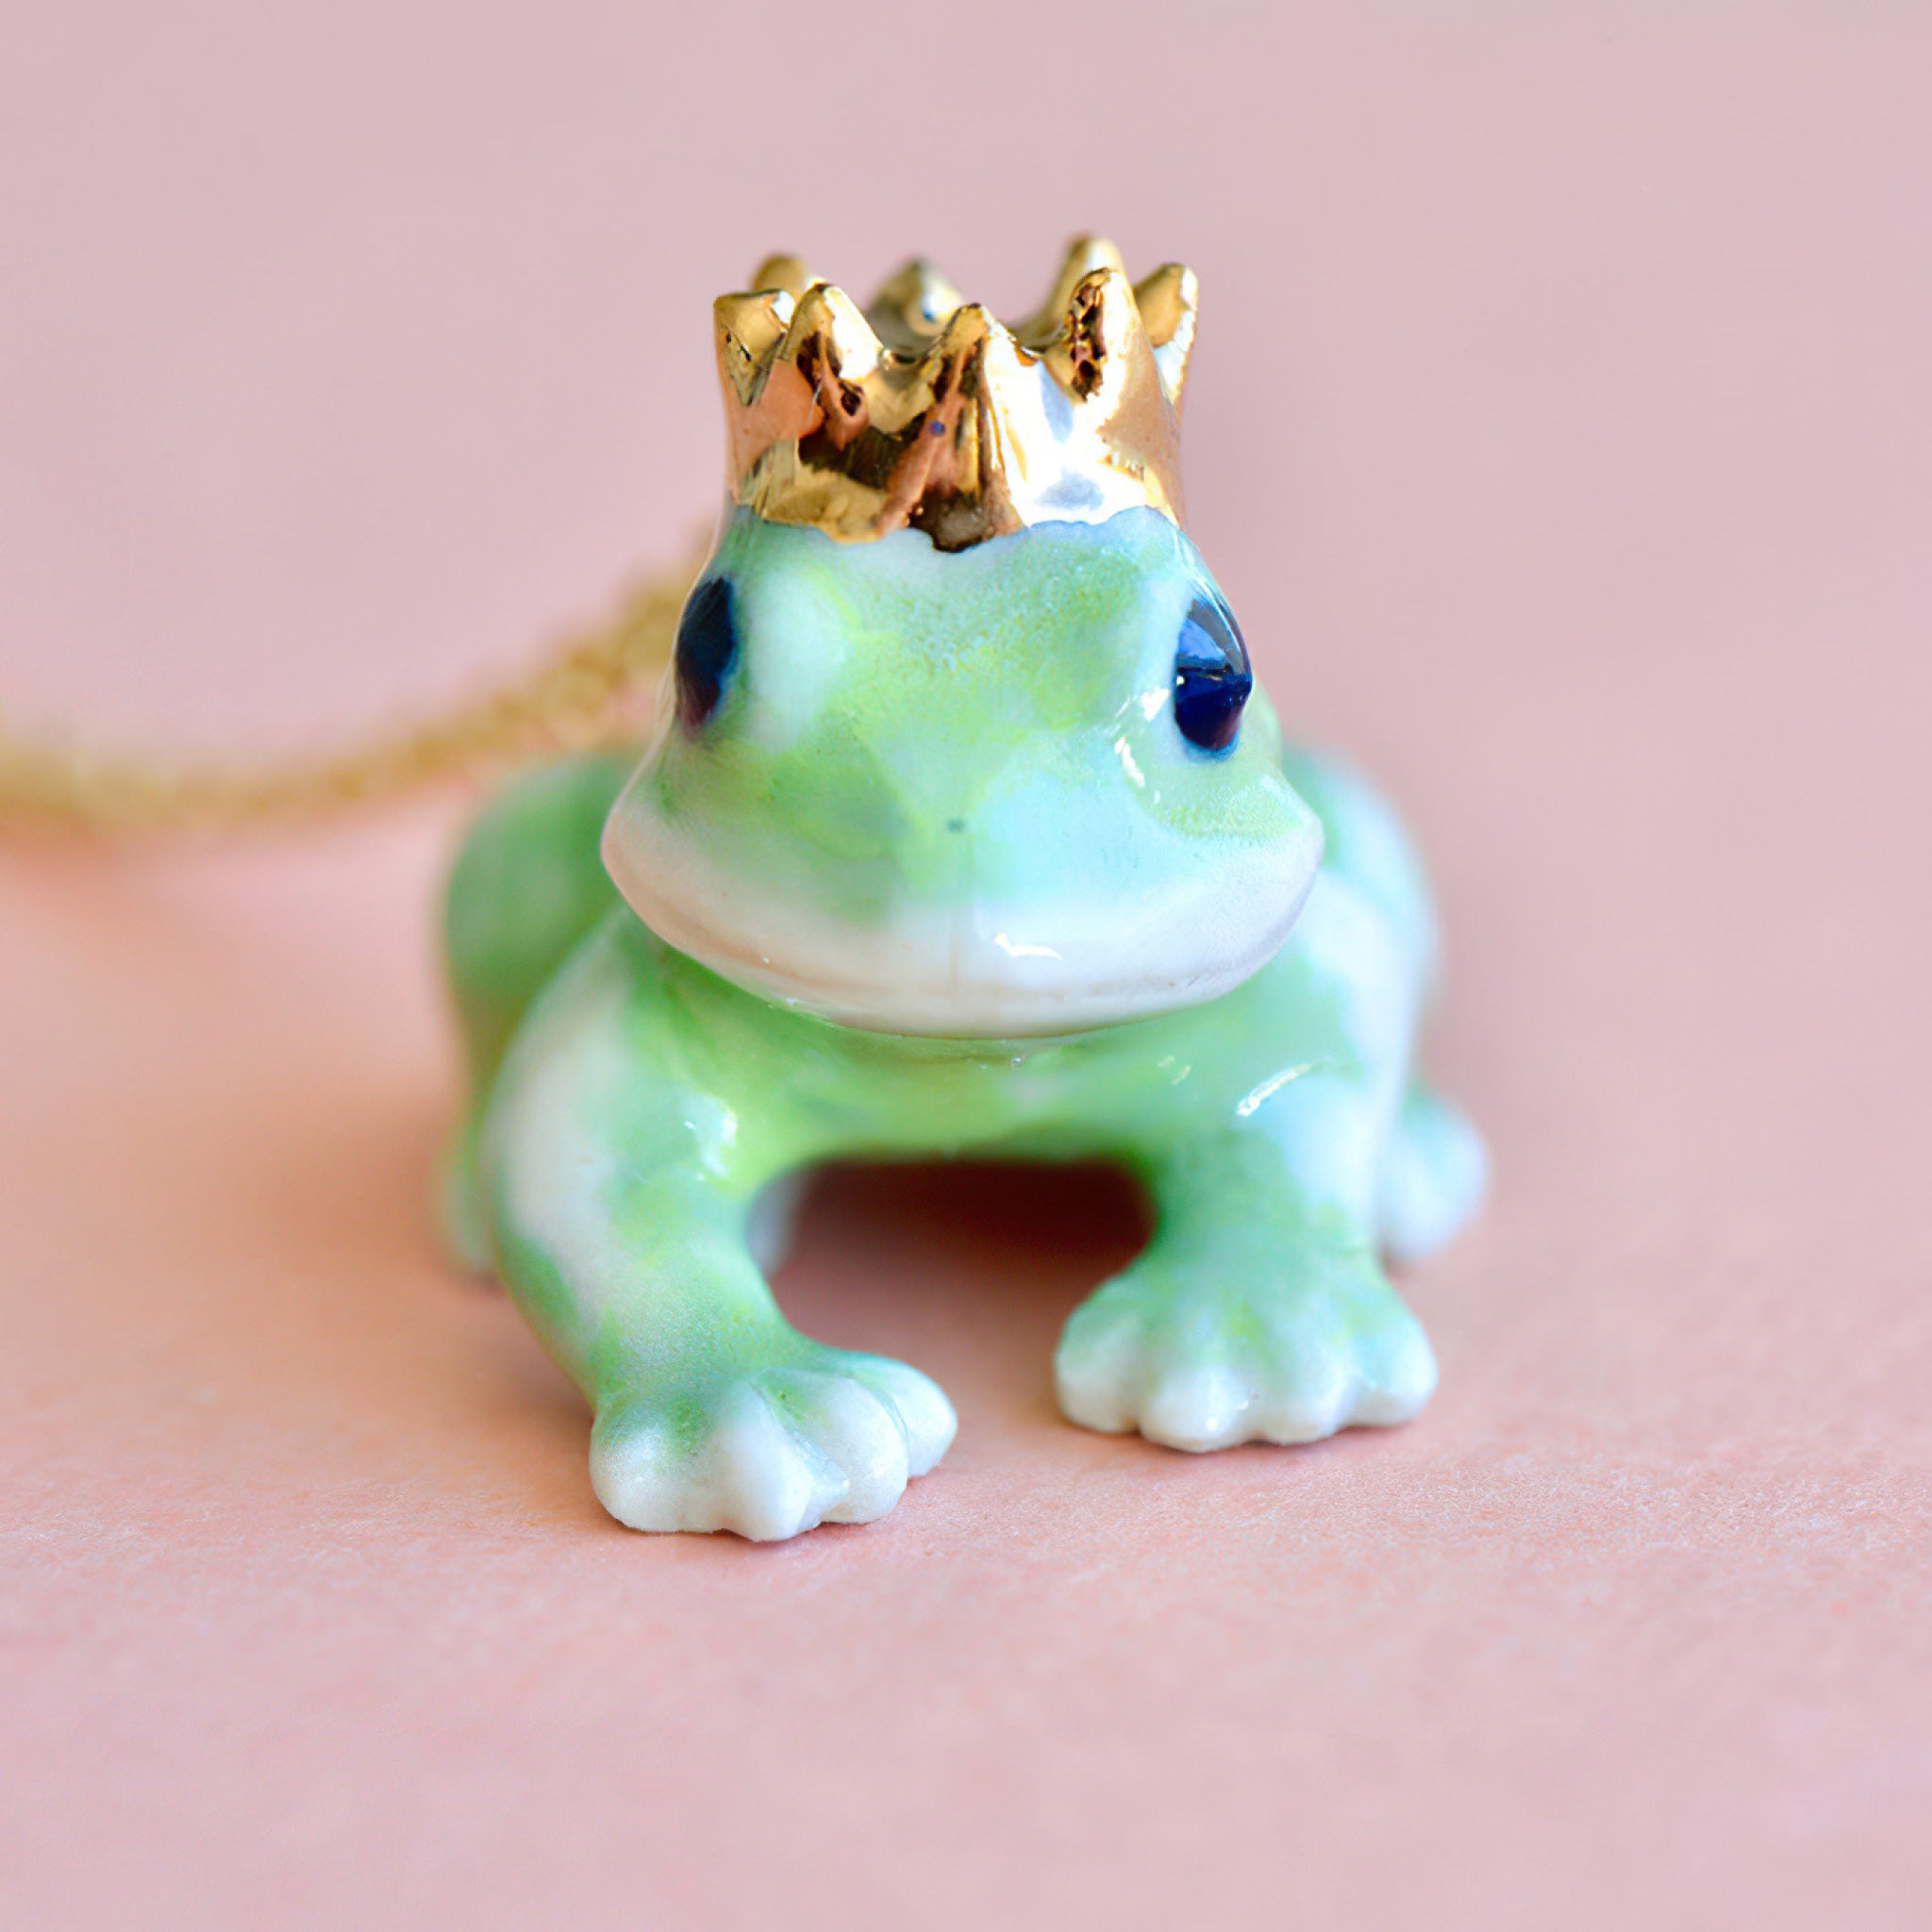 Frog Prince Pig Necklace | Camp Hollow Ceramic Animal Jewelry